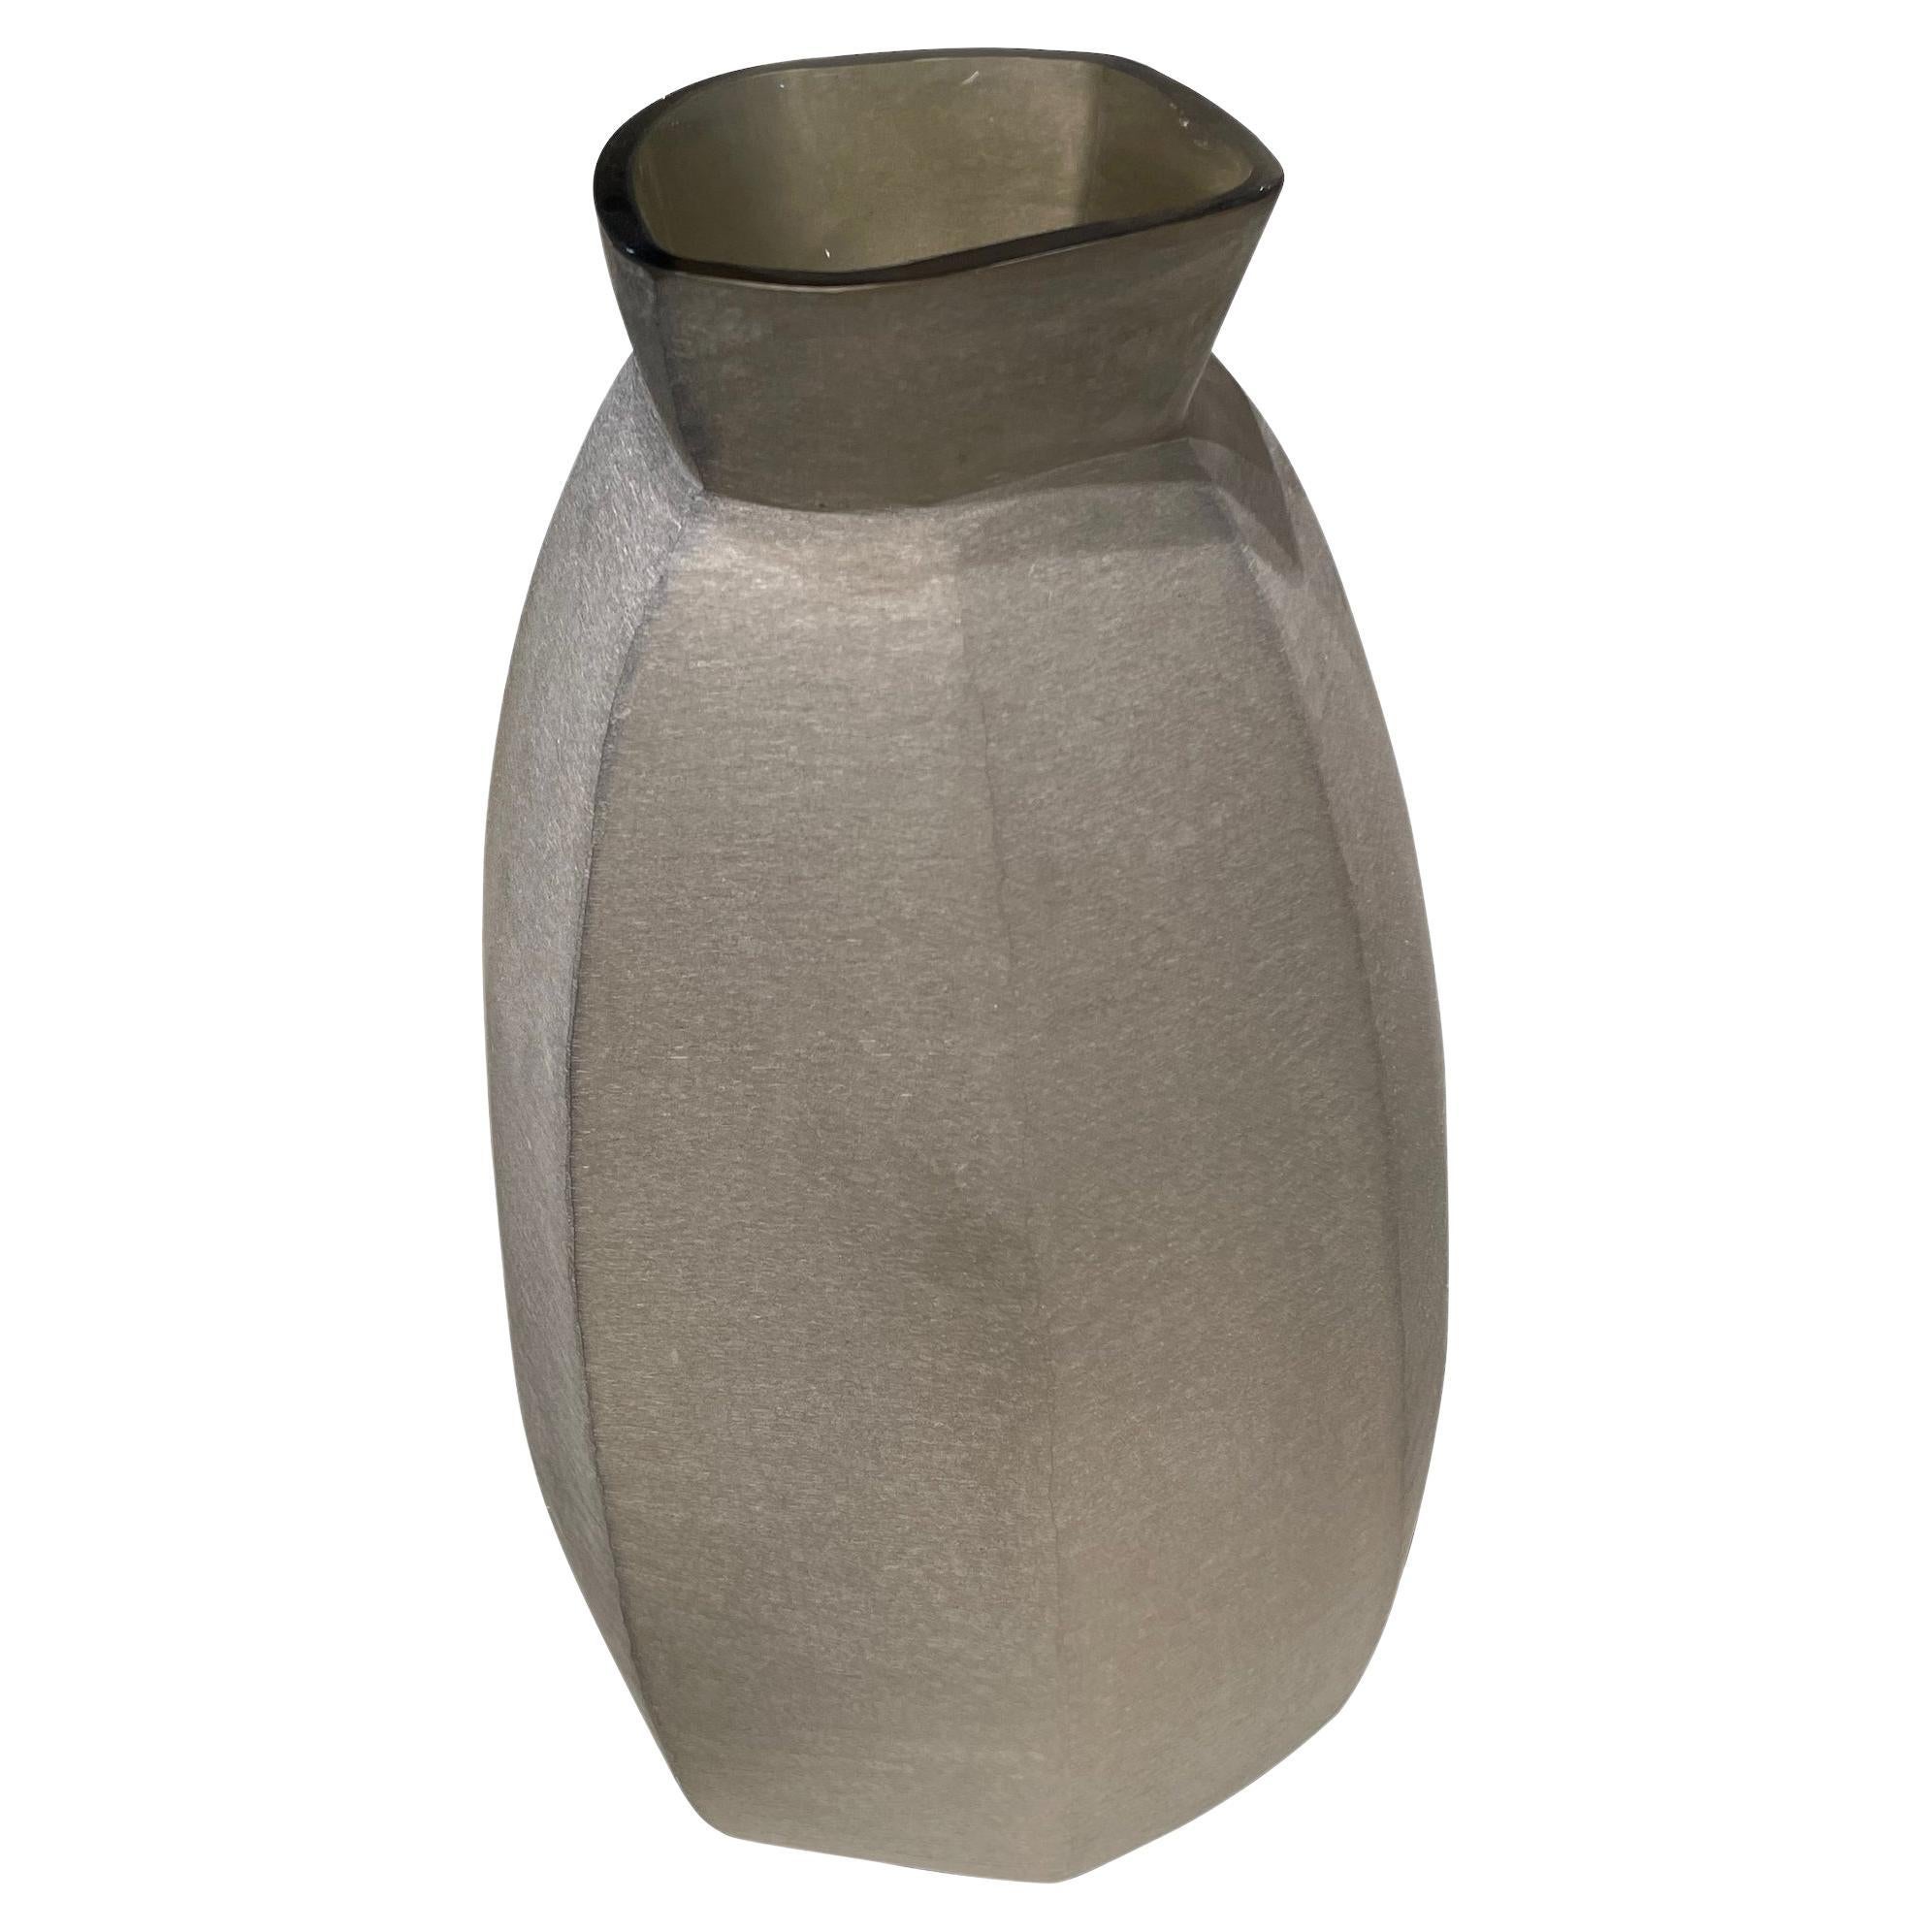 Contemporary Romanian frosted tan glass vase.
Octagonal in shape with wide lip opening.
From a large collection of glass vases from Romania.
Five in the collection of frosted tan glass vases.